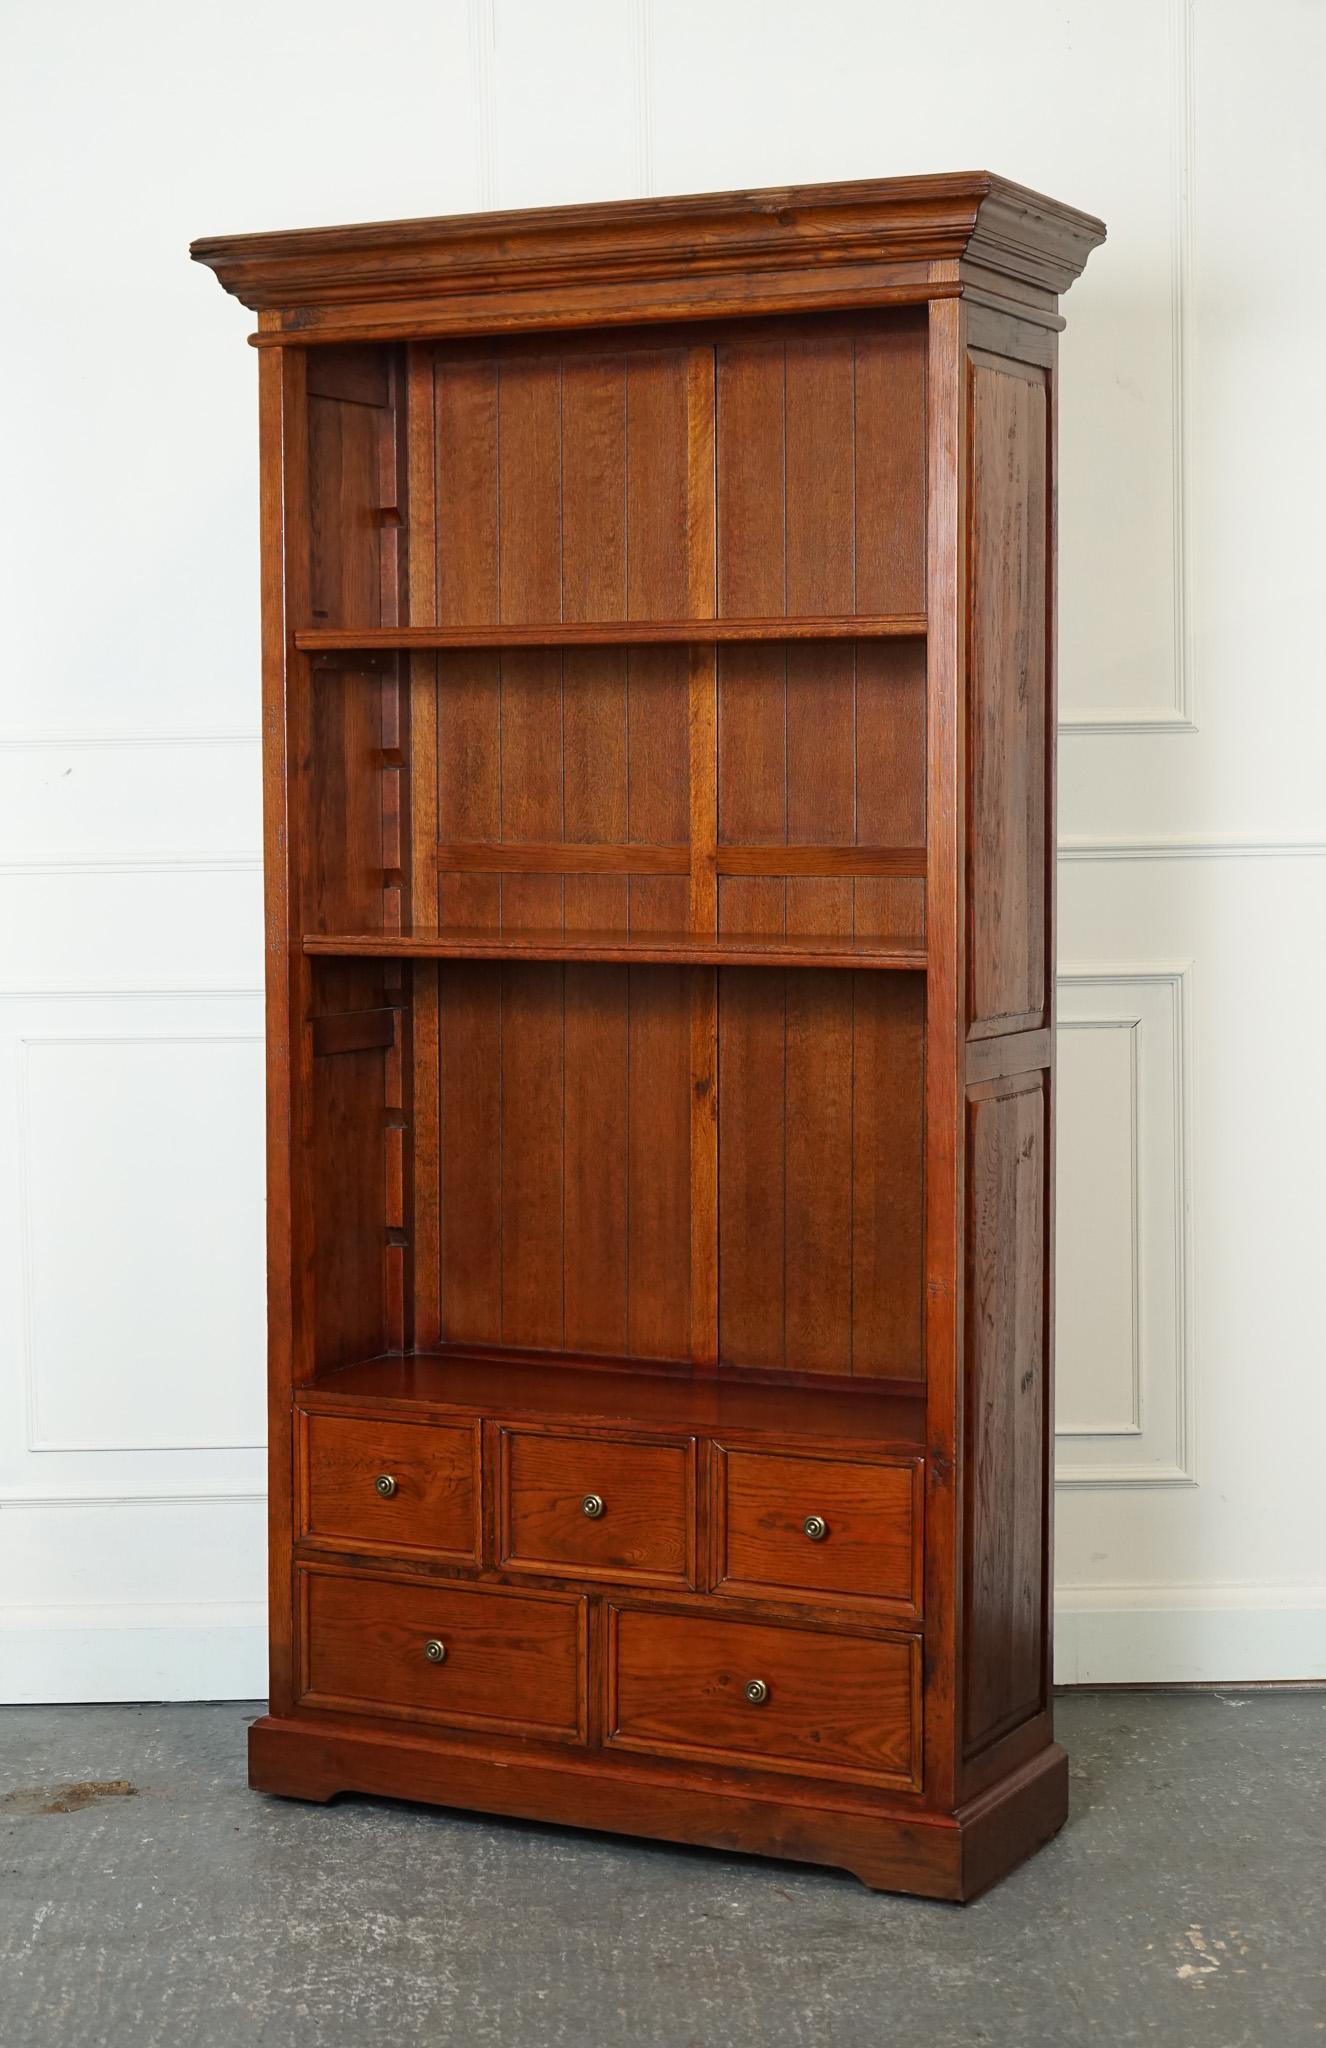 

We are delighted to offer for sale this A Lovely Vintage Teak Open Bookcase With 5 Drawers And Brass Handles .

This piece exudes a warm and inviting charm while showcasing the natural beauty of teak wood. This piece would likely feature a rich